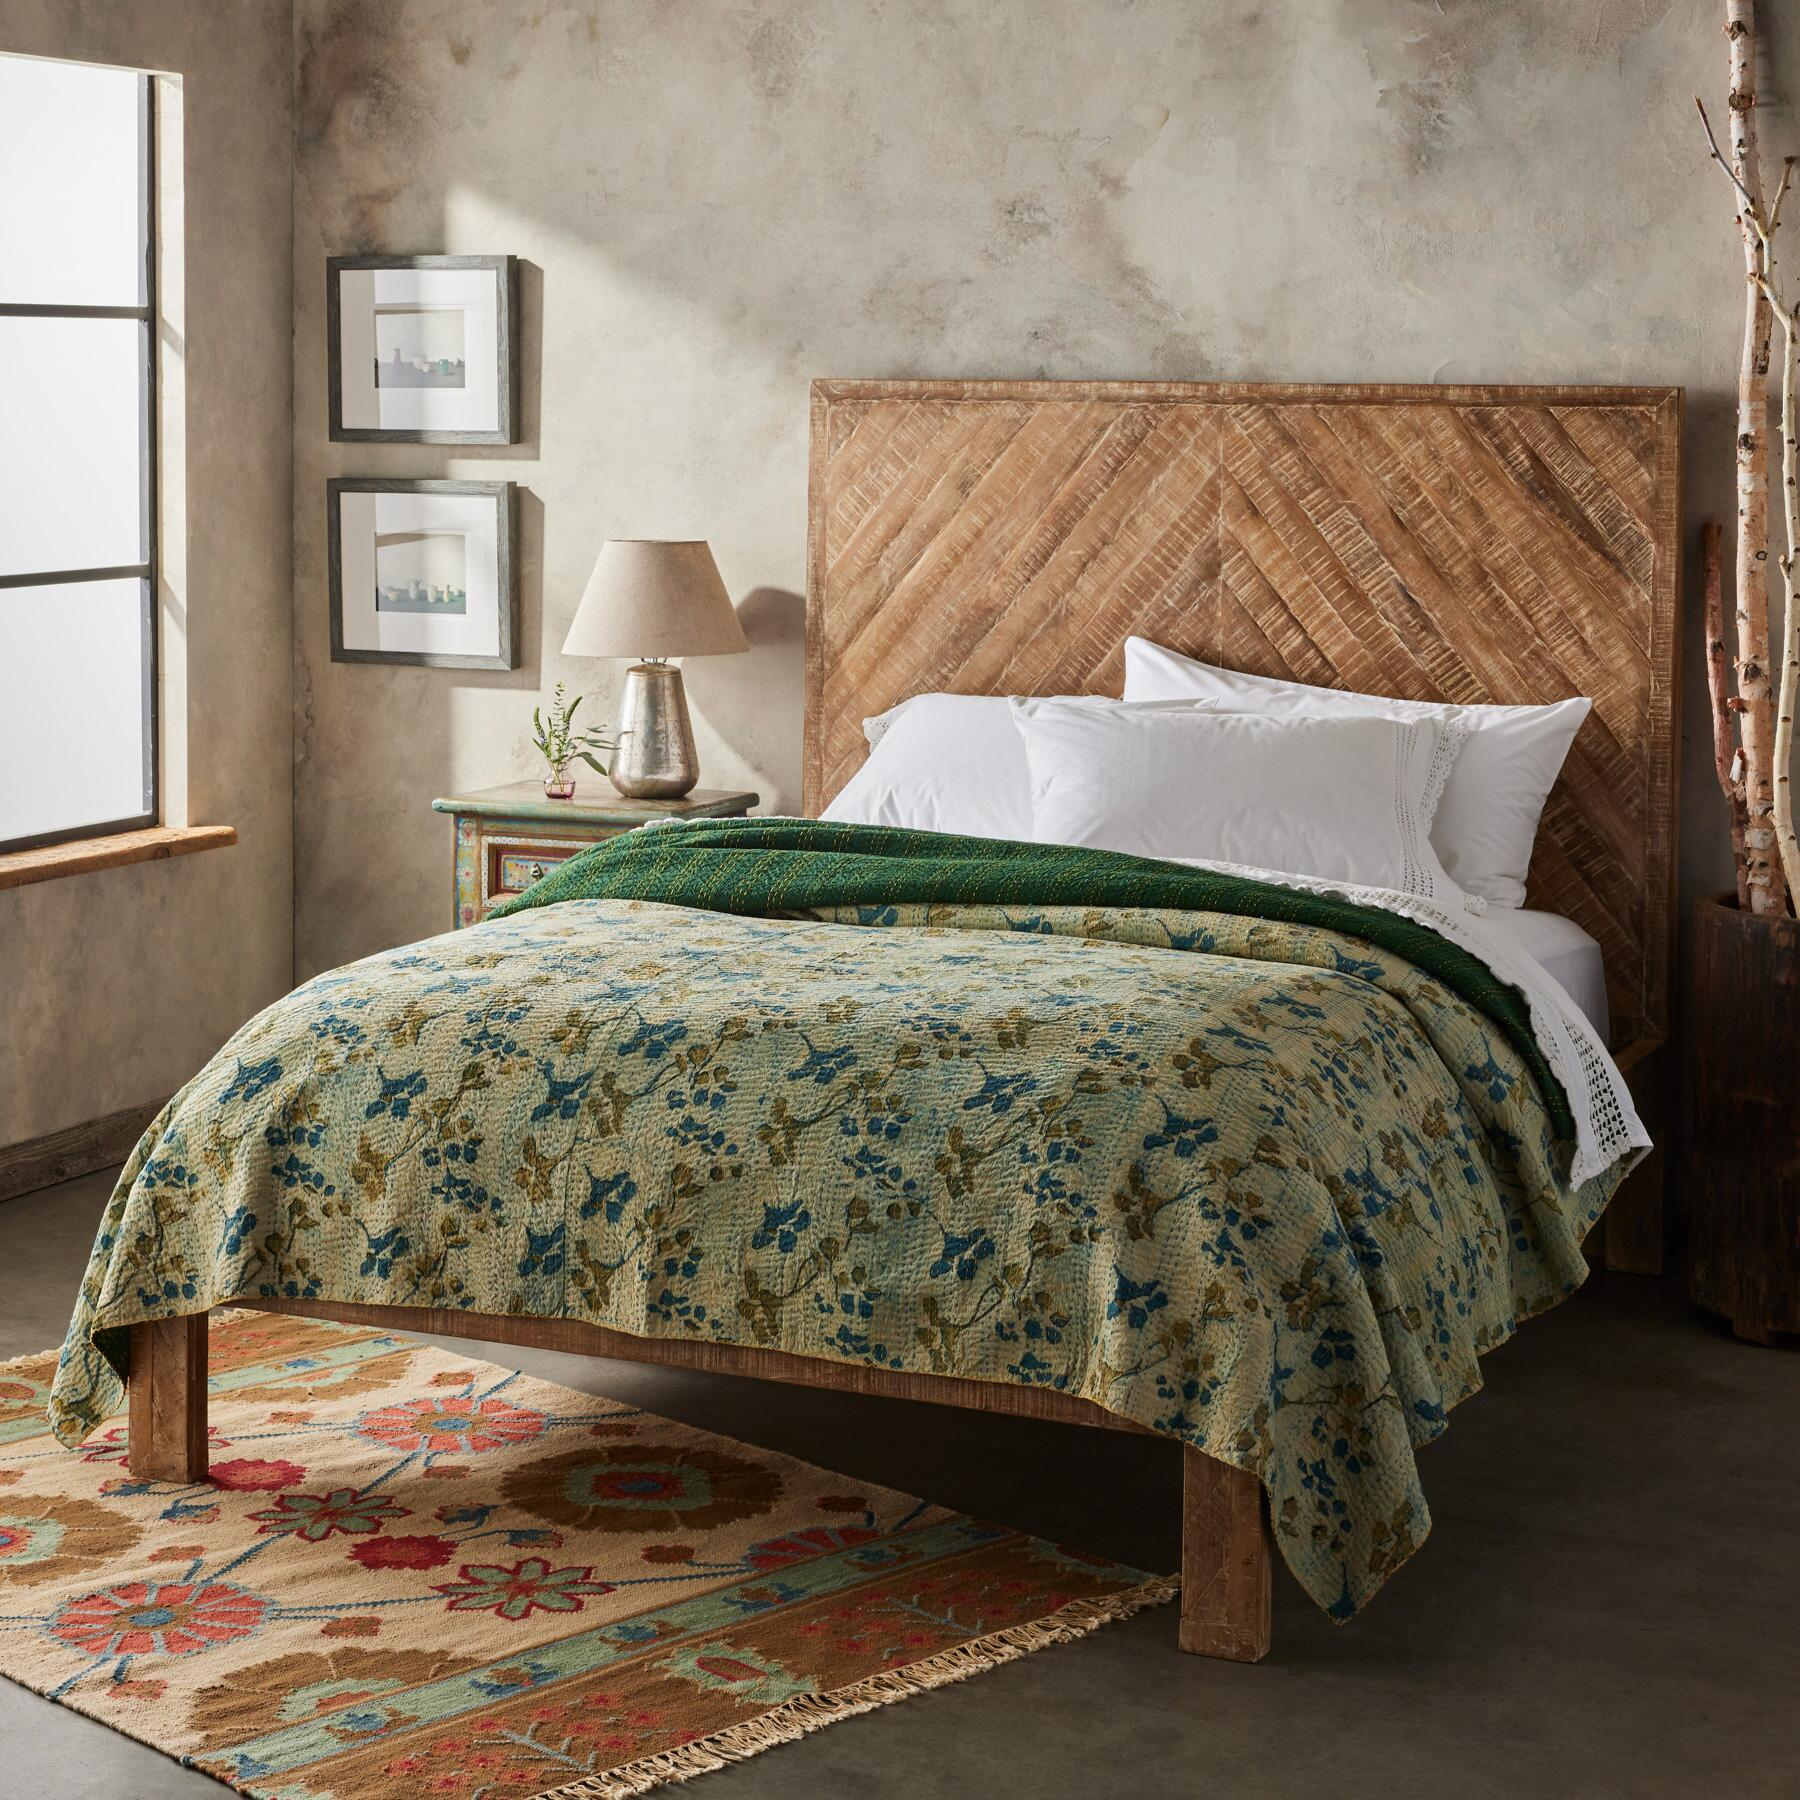 green bedding on wood bed with fringe rug